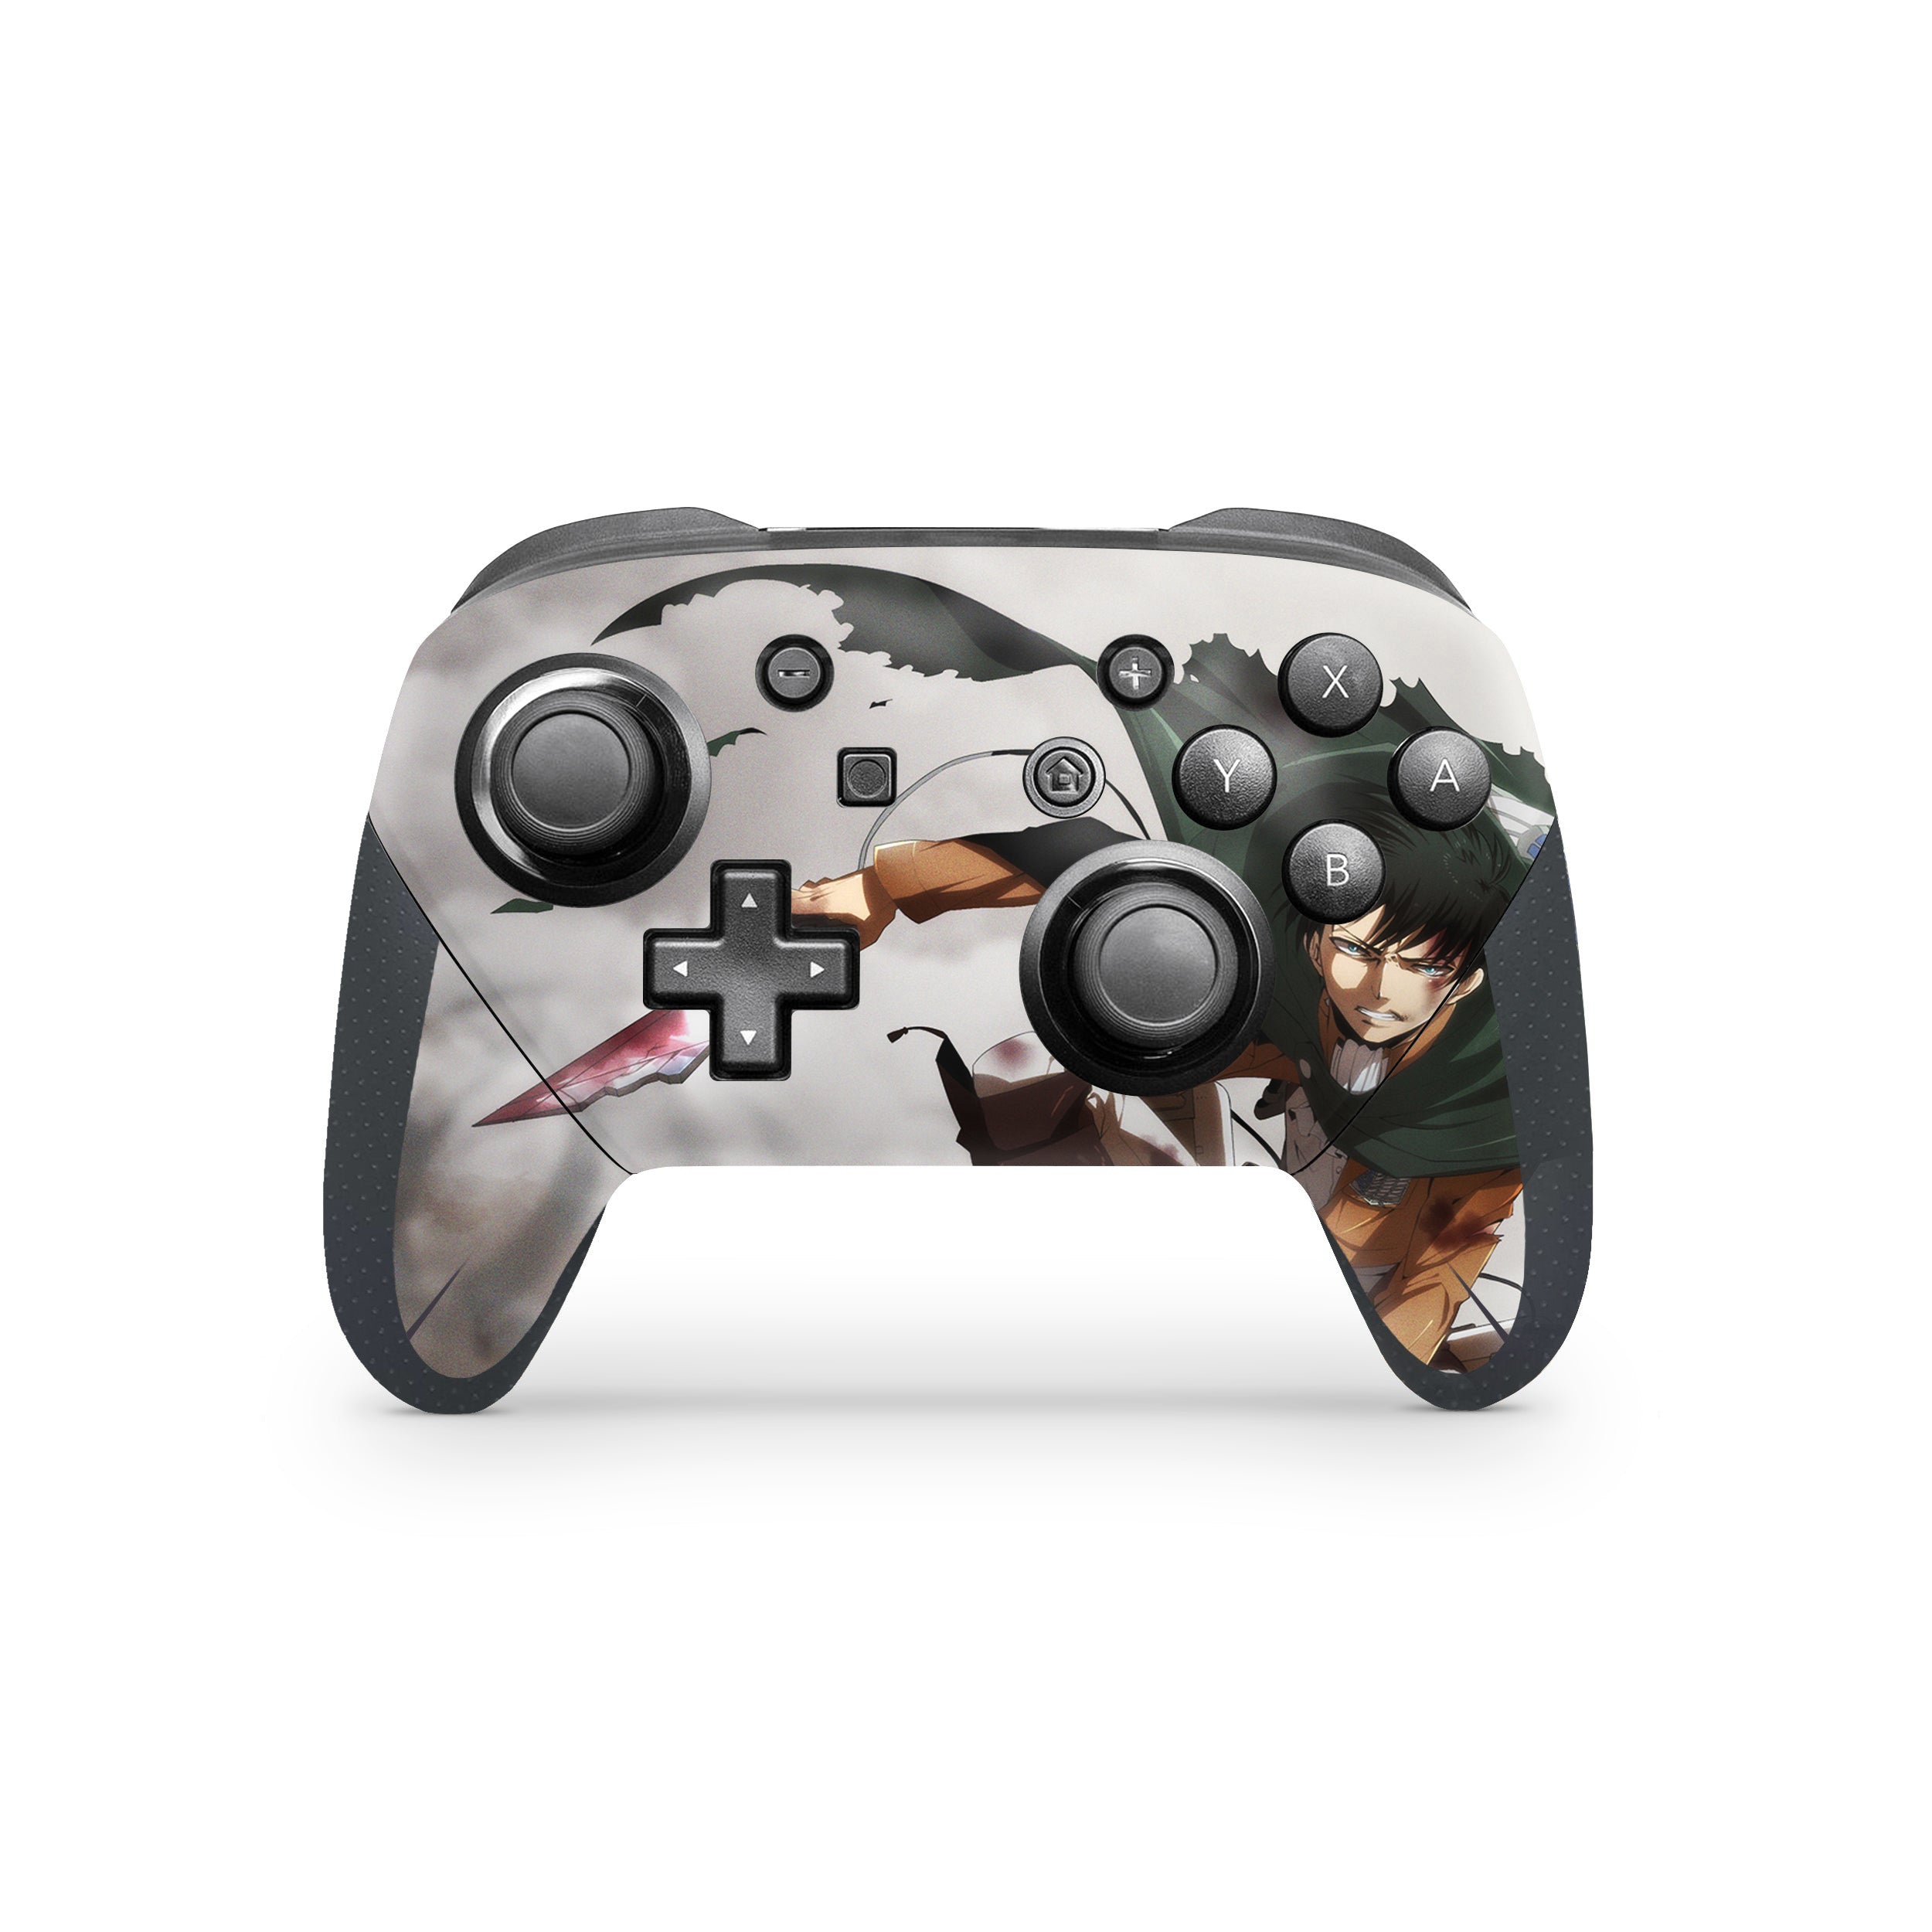 A video game skin featuring a Attack On Titan Levi Ackerman design for the Switch Pro Controller.